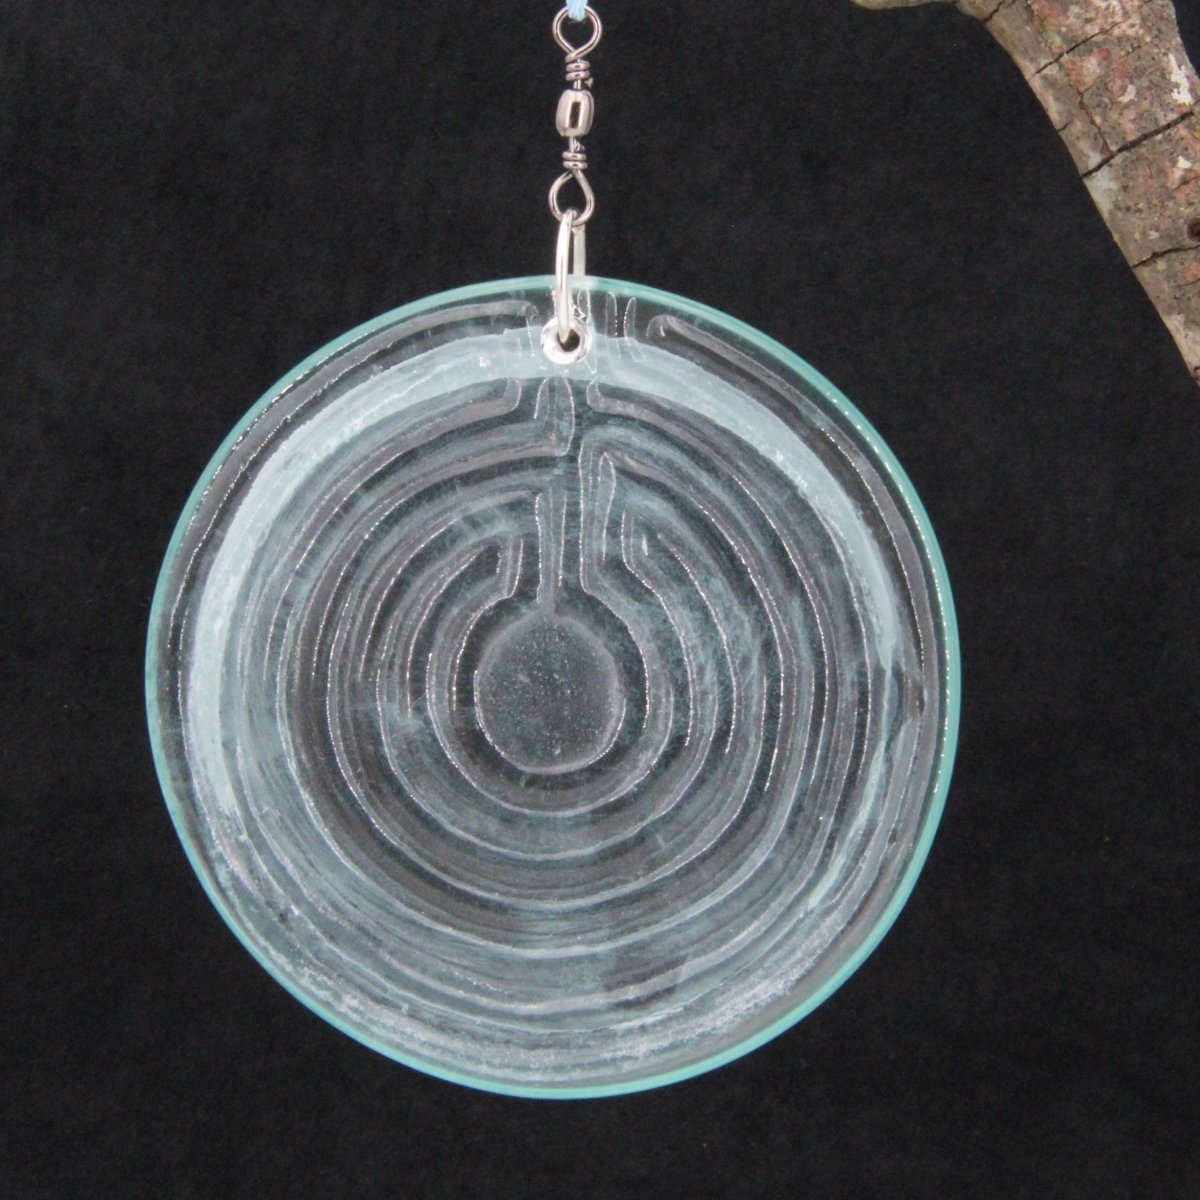 Labyrinth Suncatcher from an Upcycled Wine Bottle